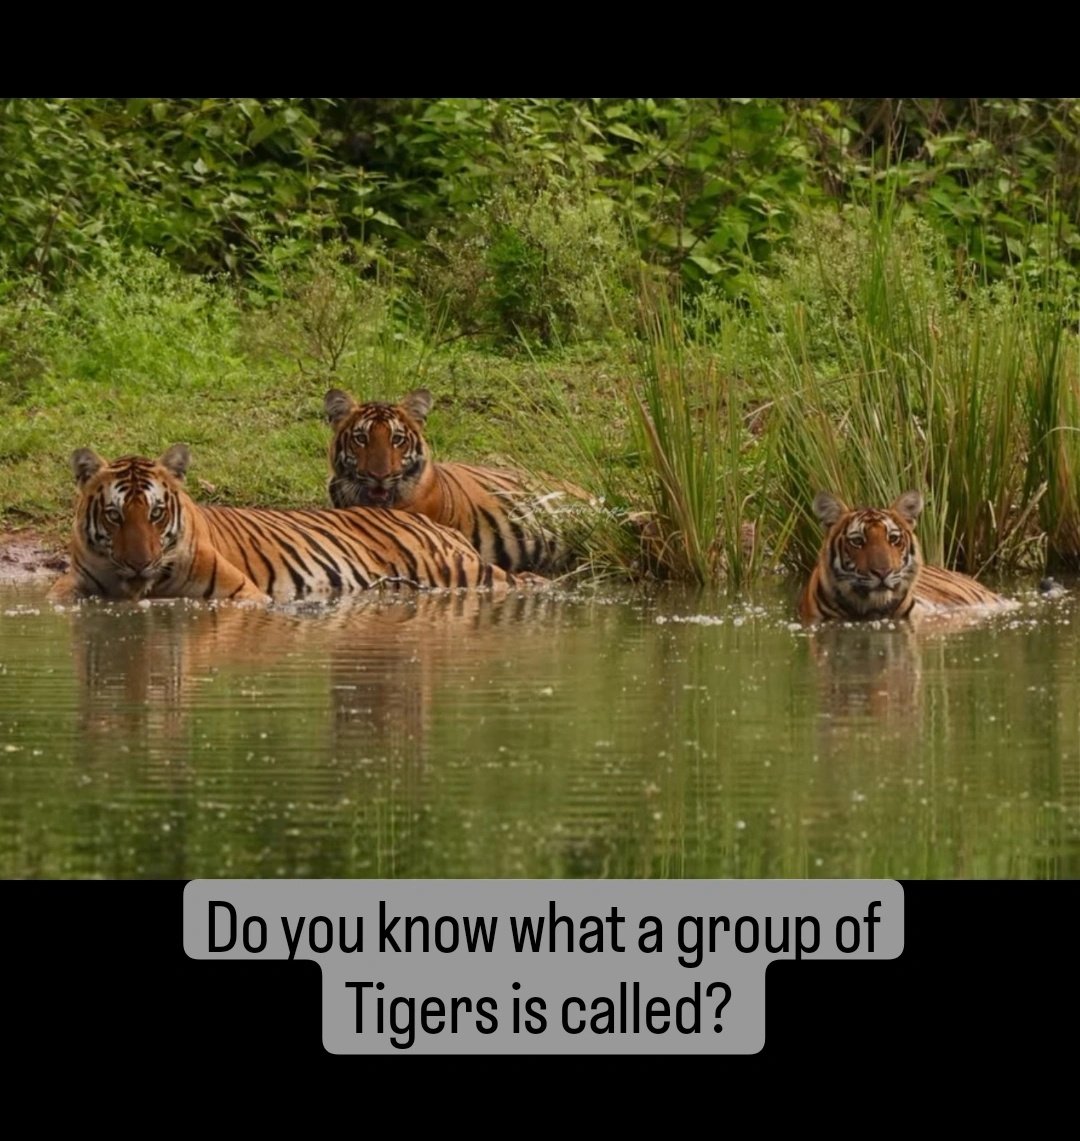 Do you know what a group of tigers is called? Stay tuned for the answer later in the day. 📸 SN CreativeWings #junglelodgesjlr #tiger #tigers #wildlife #kingssanctuary #karnatakatourism #amritmahotsav #travel #resort #jungleresort #weekendgetaway